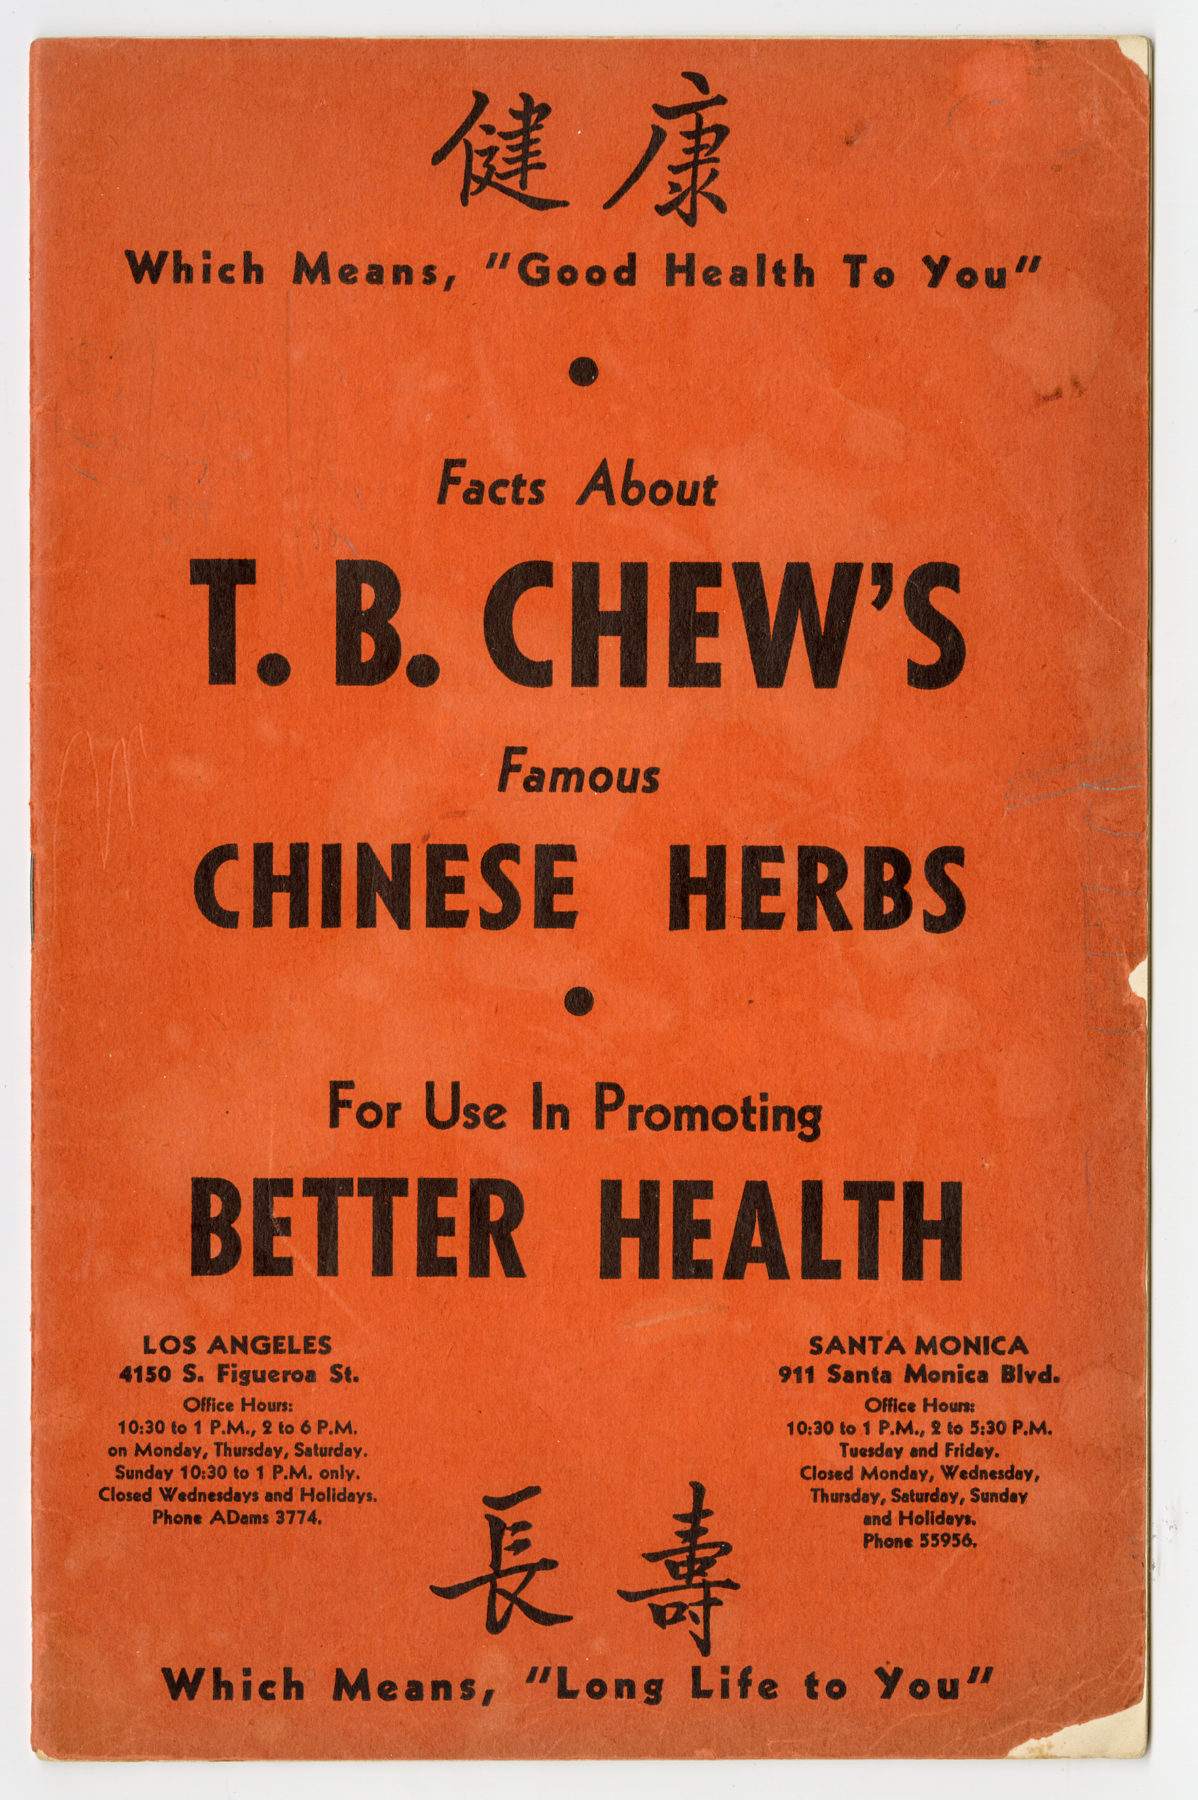 Facts About T.B. Chew's Famous Chinese Herbs Pamplet. Courtesy of Roy Delbyck, Museum of Chinese in America (MOCA) Collection.